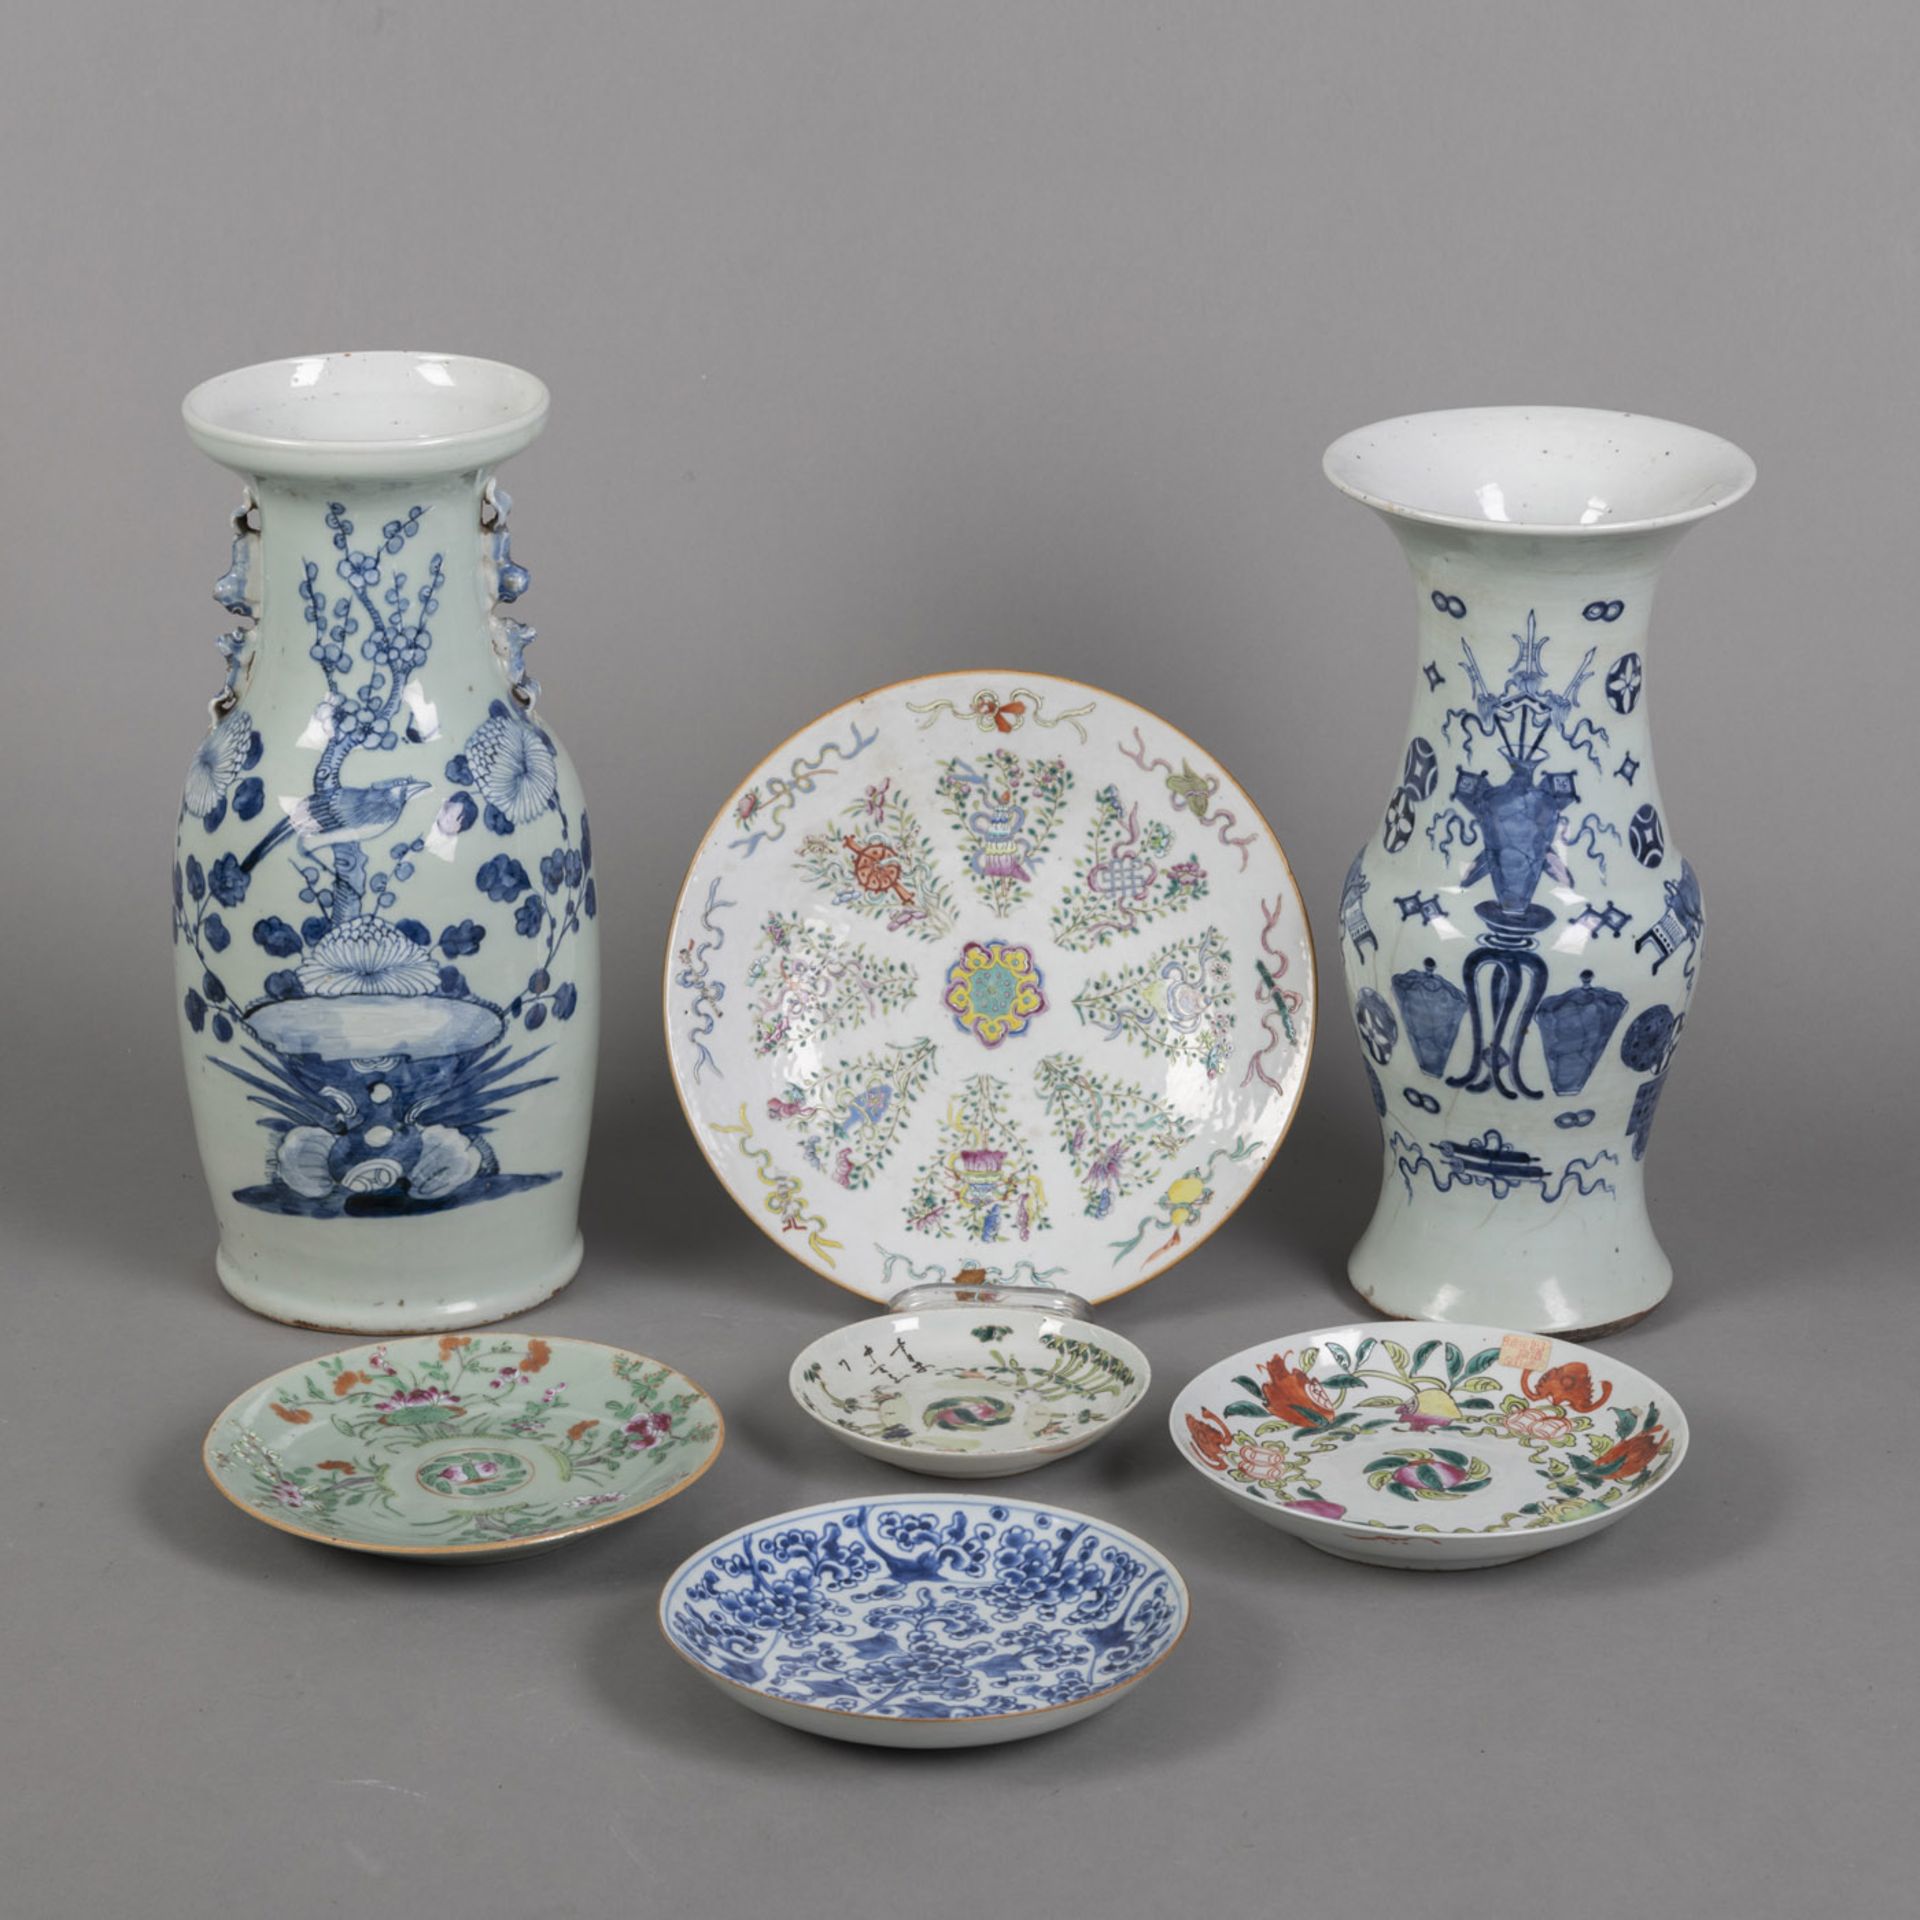 FIVE PORCELAIN PLATES AND TWO VASES PAINTED WITH POLYCHROME TREASURE AND FLOWER DECORATION